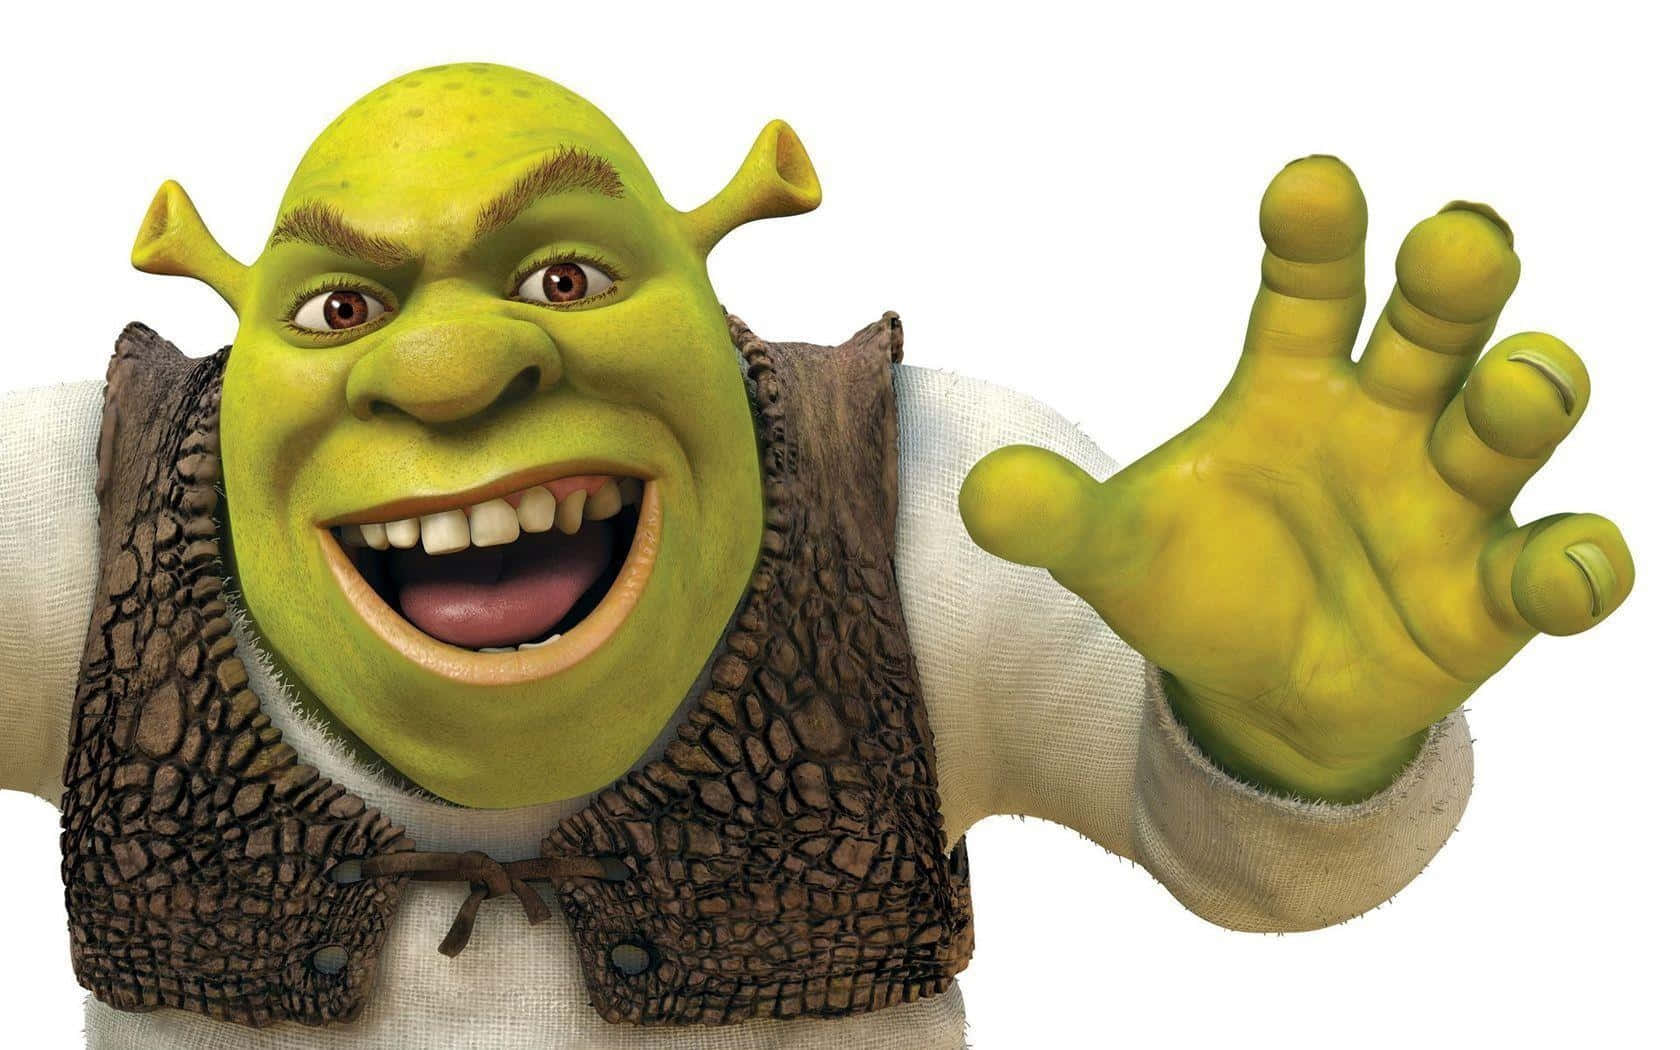 Shrek is full of laughter, enthusiasm, and green goo.